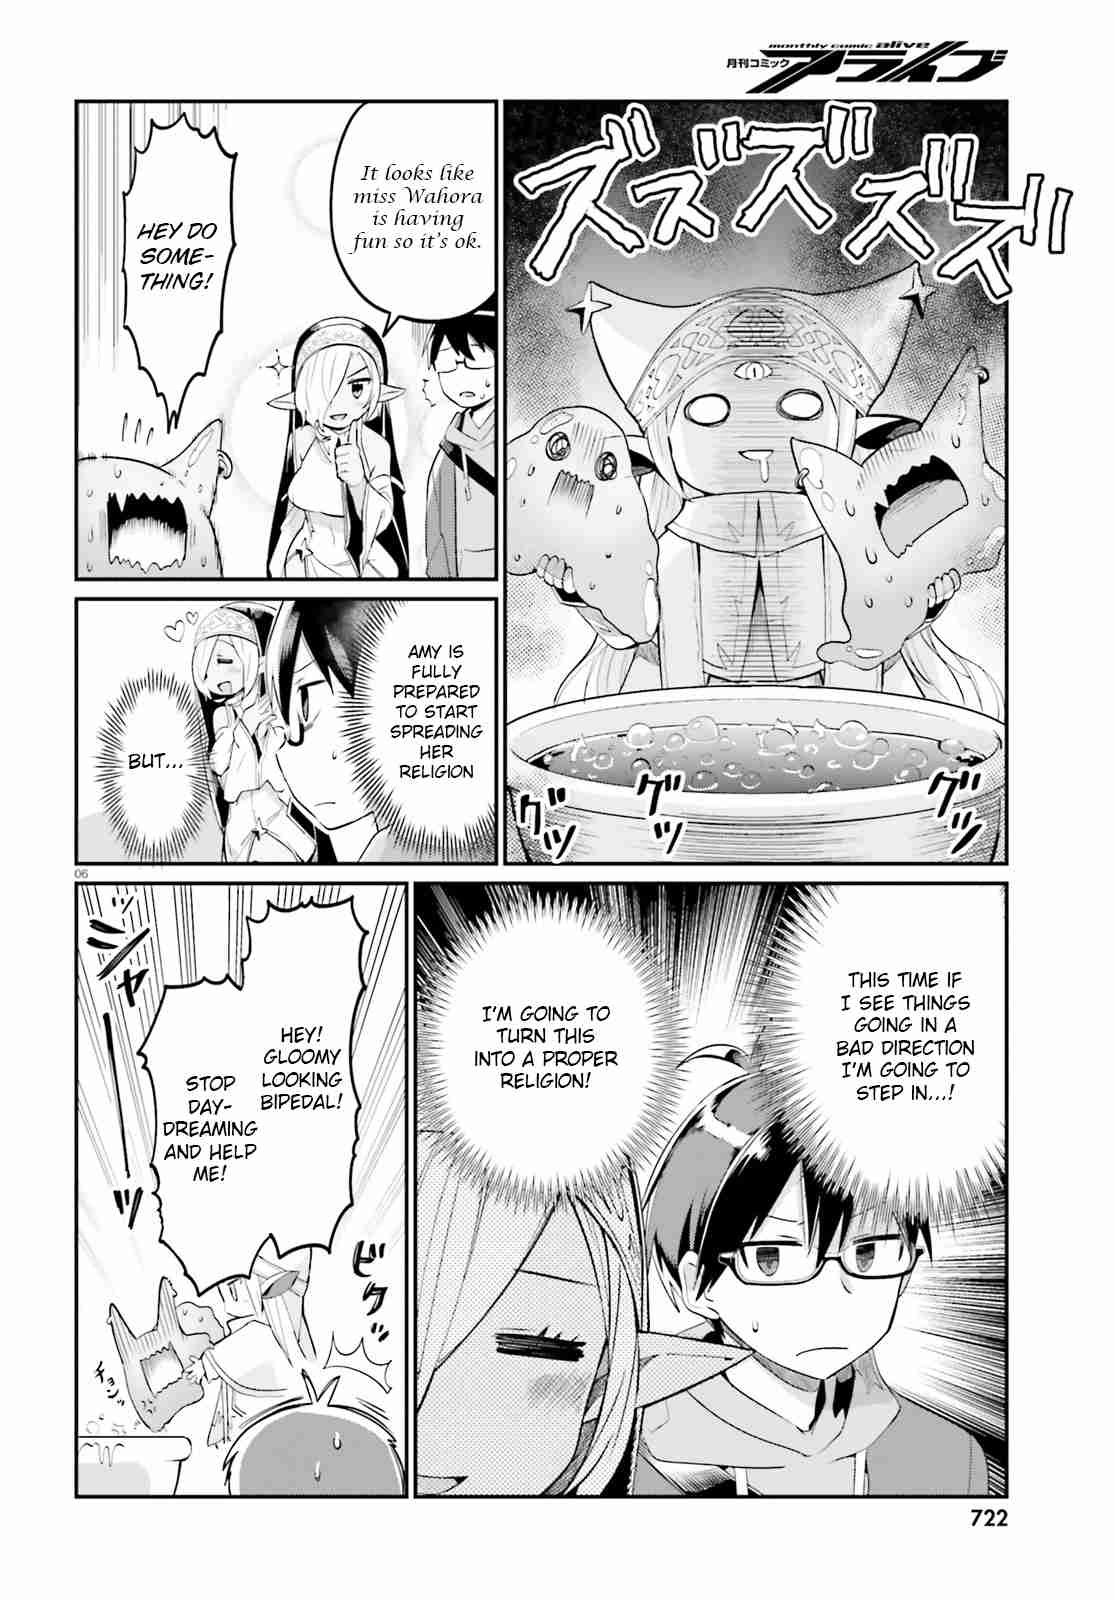 Welcome To Religion In Another World! Vol. 1 Ch. 6 Welcome to splosh splosh